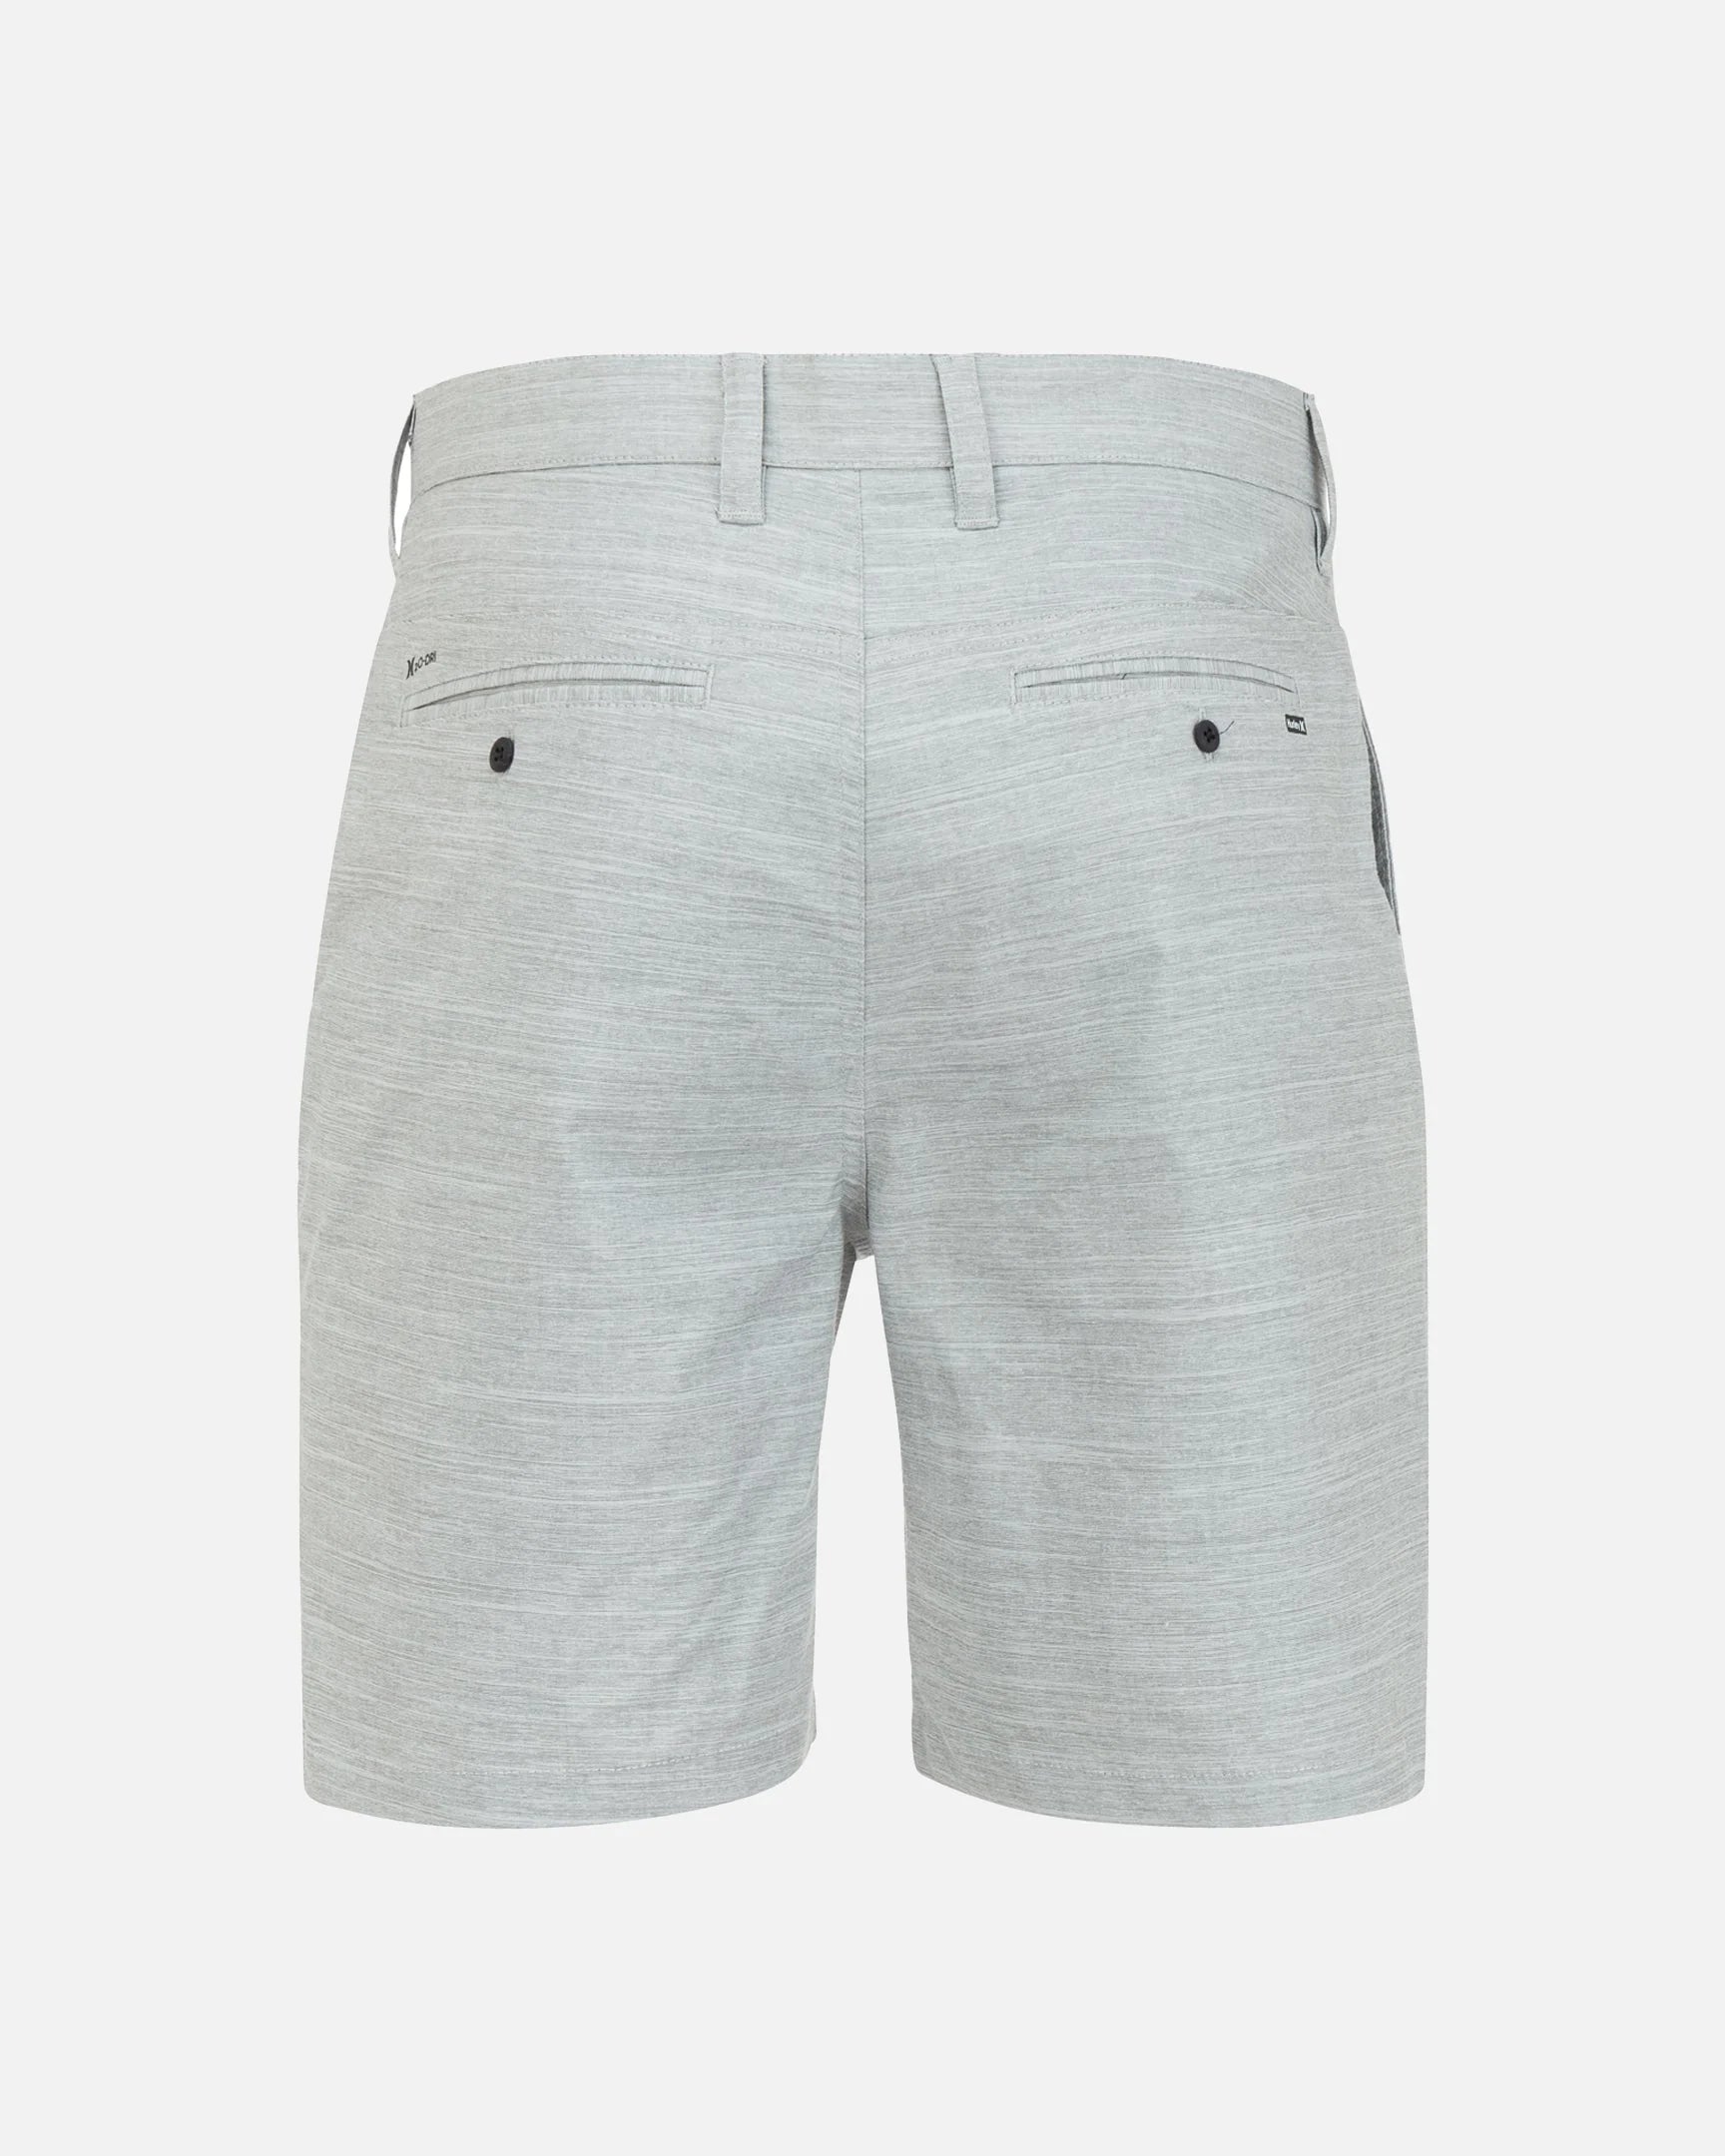 Our Hurley H20 Dri Breathe Walkshort puts comfort first. Crafted with moisture-wicking fabric, this all-season staple keeps you dry and comfortable